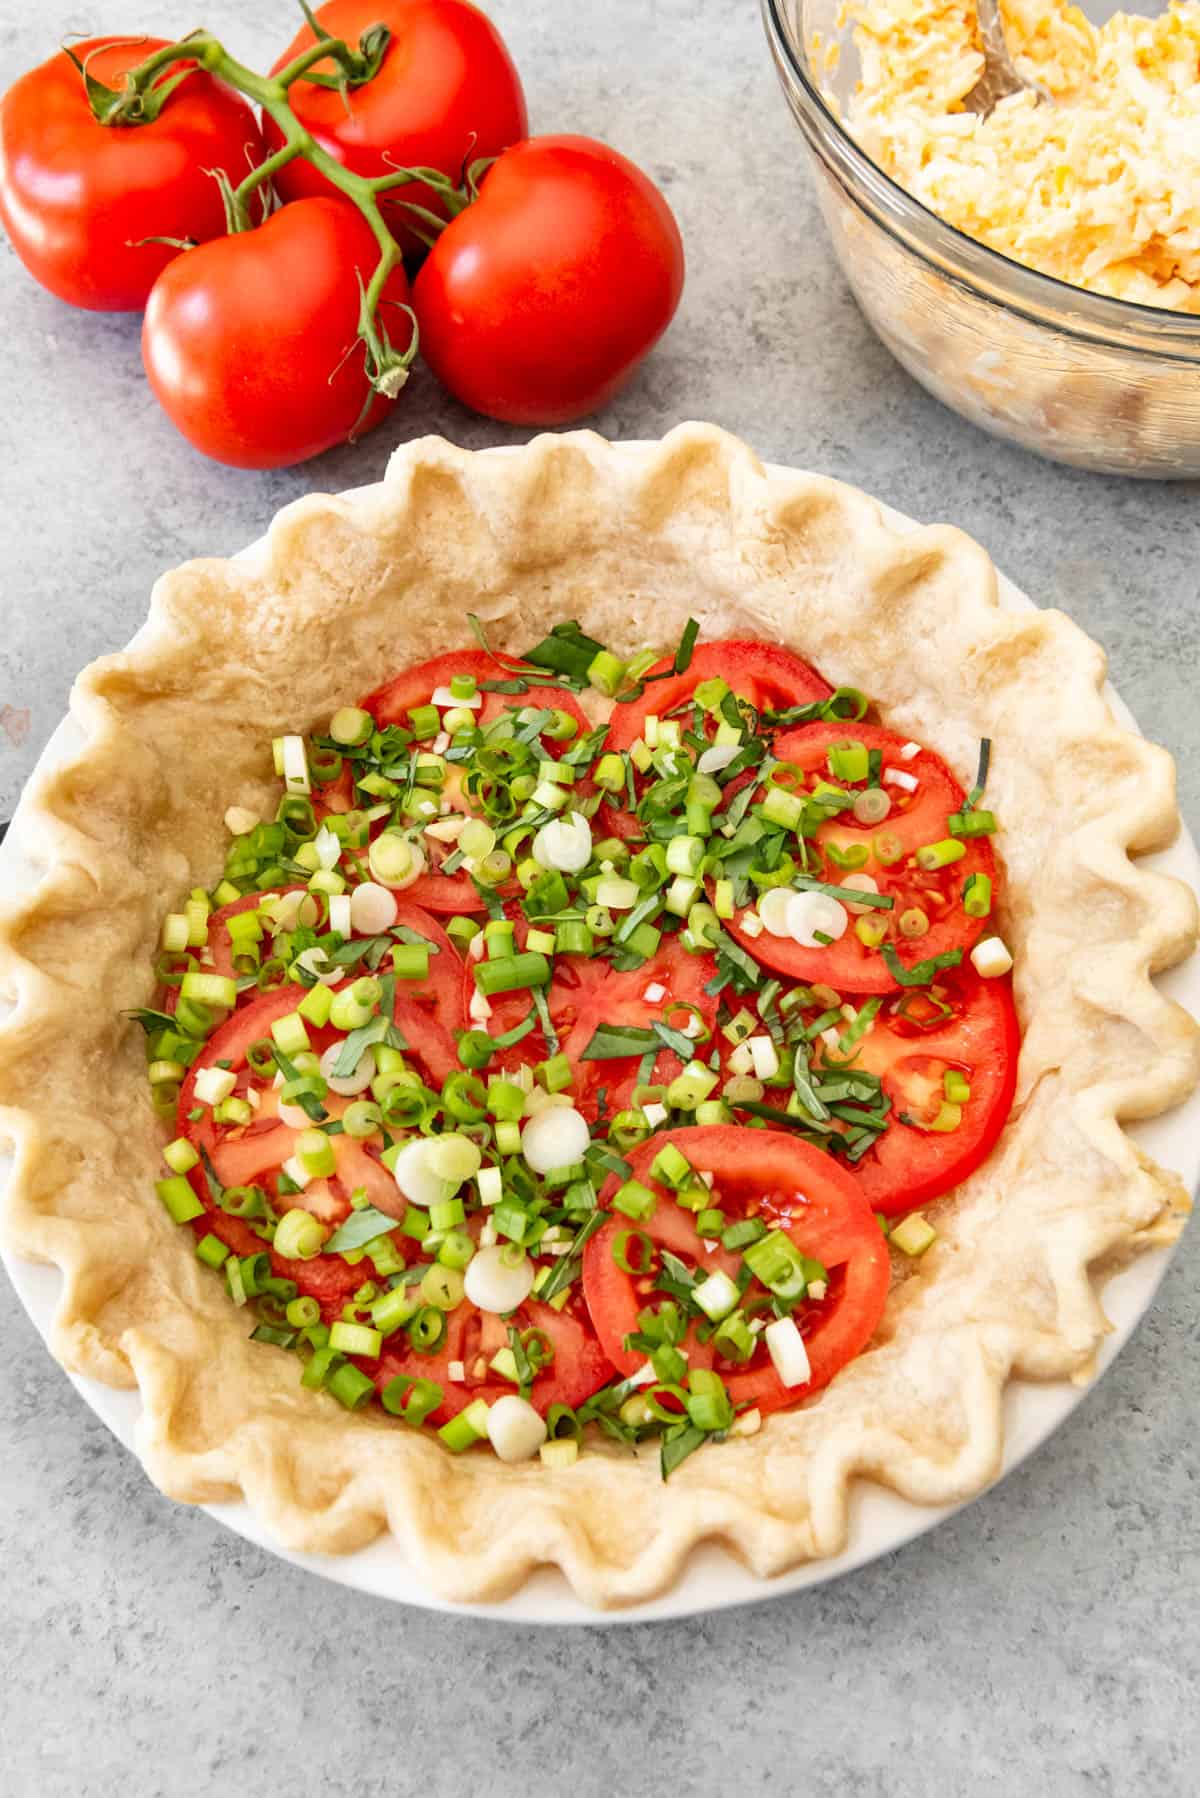 A layer of sliced tomatoes and green onions in a parbaked pie crust.